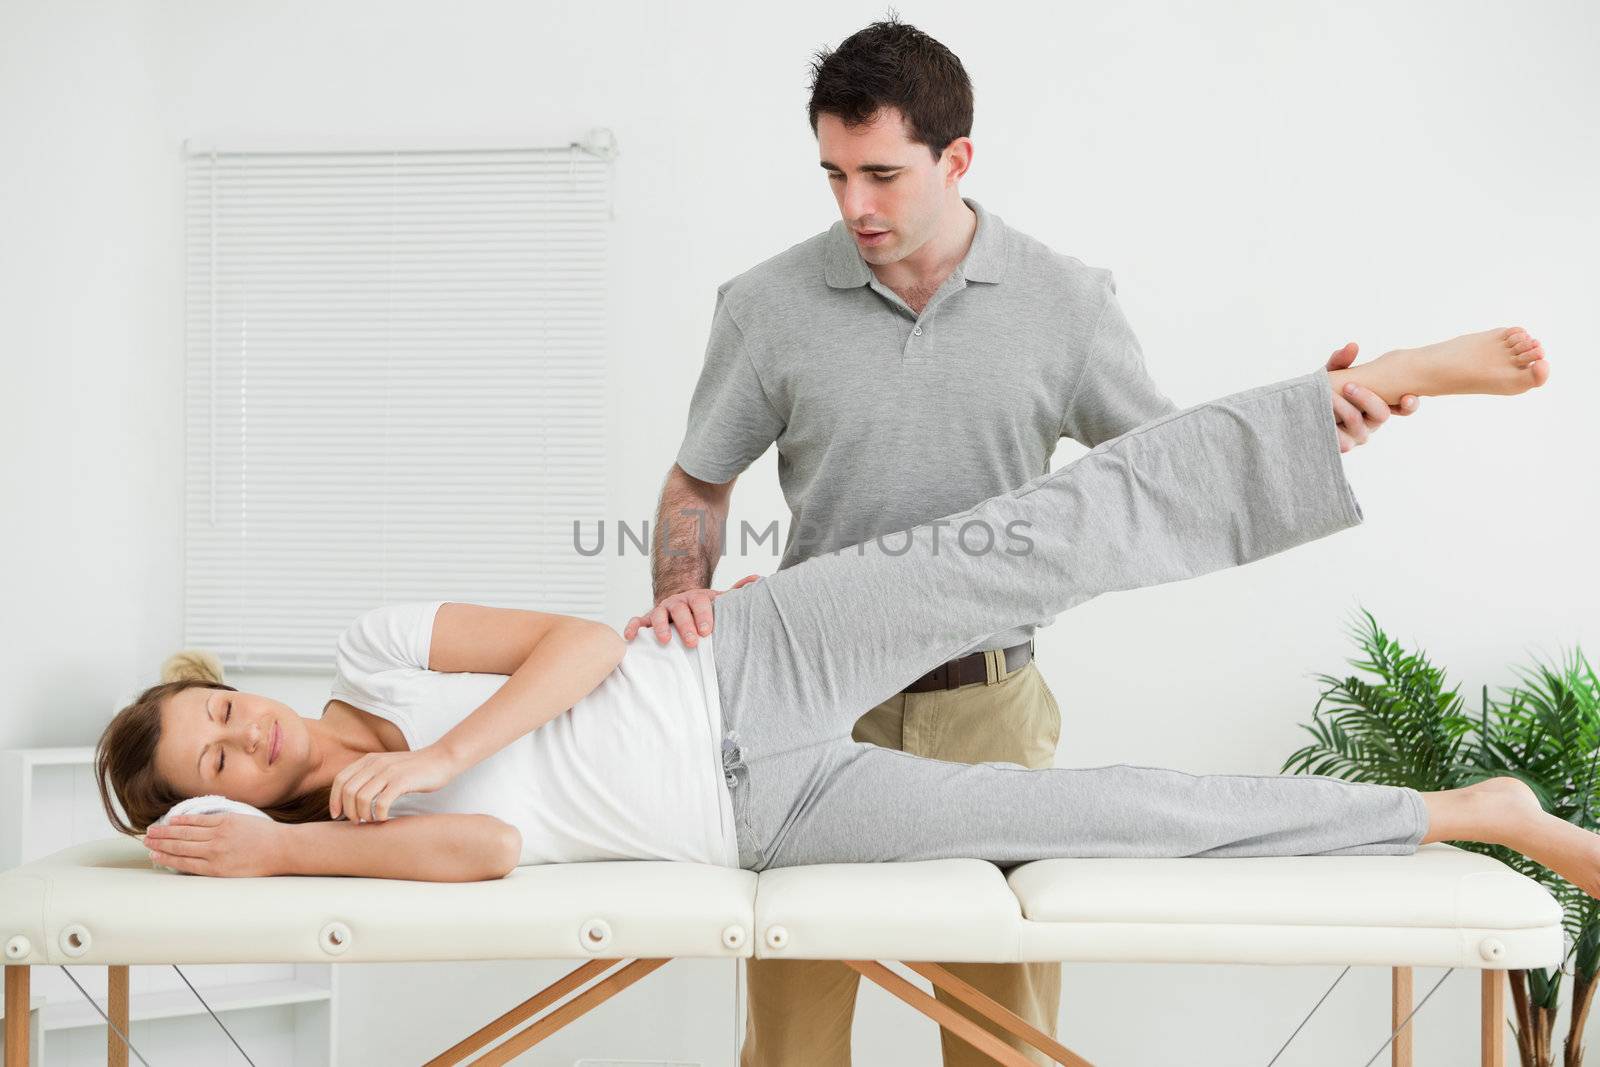 Serious practitioner rising the leg of his patient by Wavebreakmedia